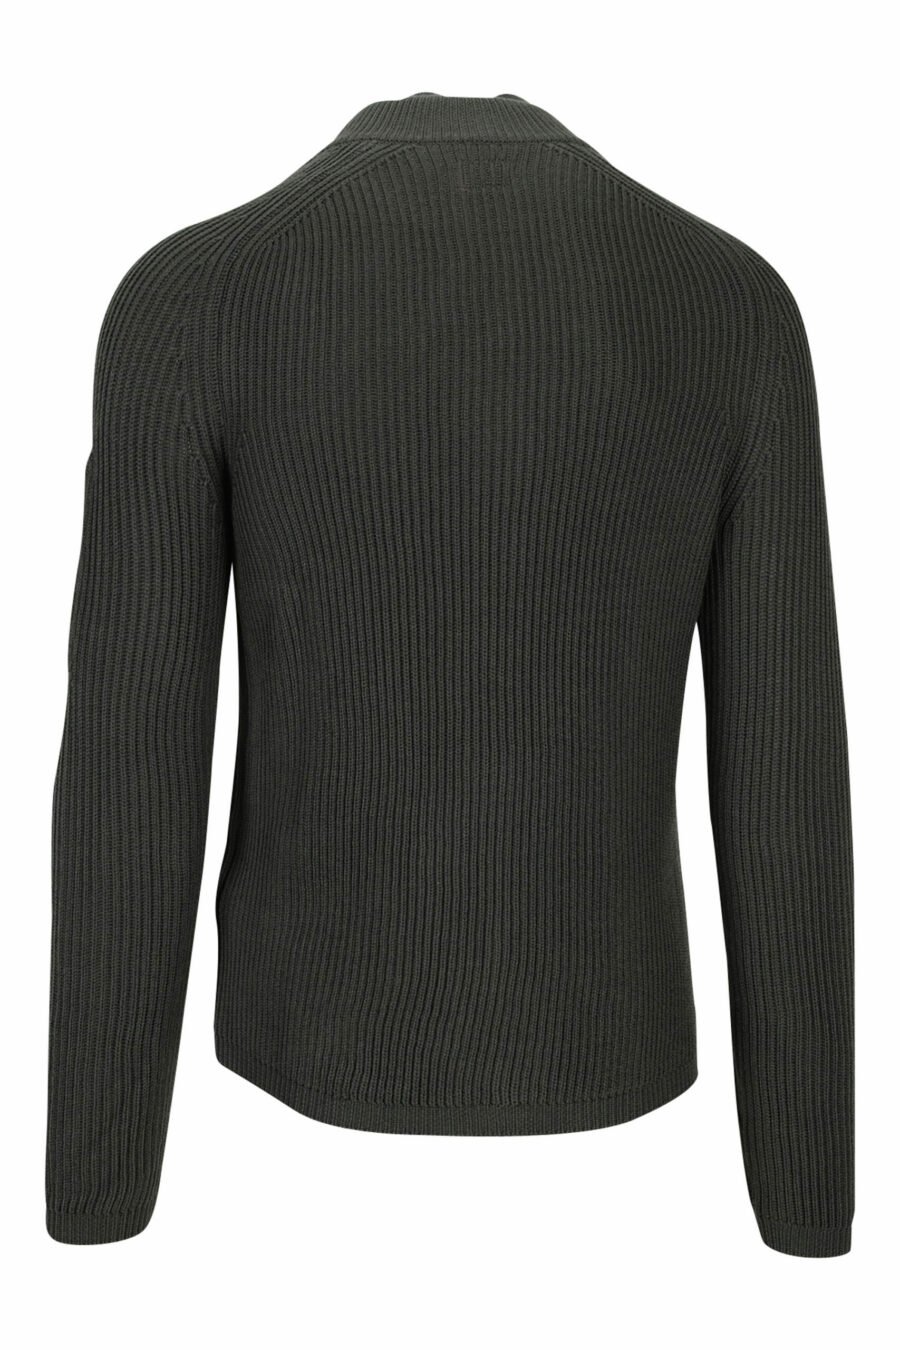 Green turtleneck jumper with zip and side lens logo - 7620943635072 3 scaled